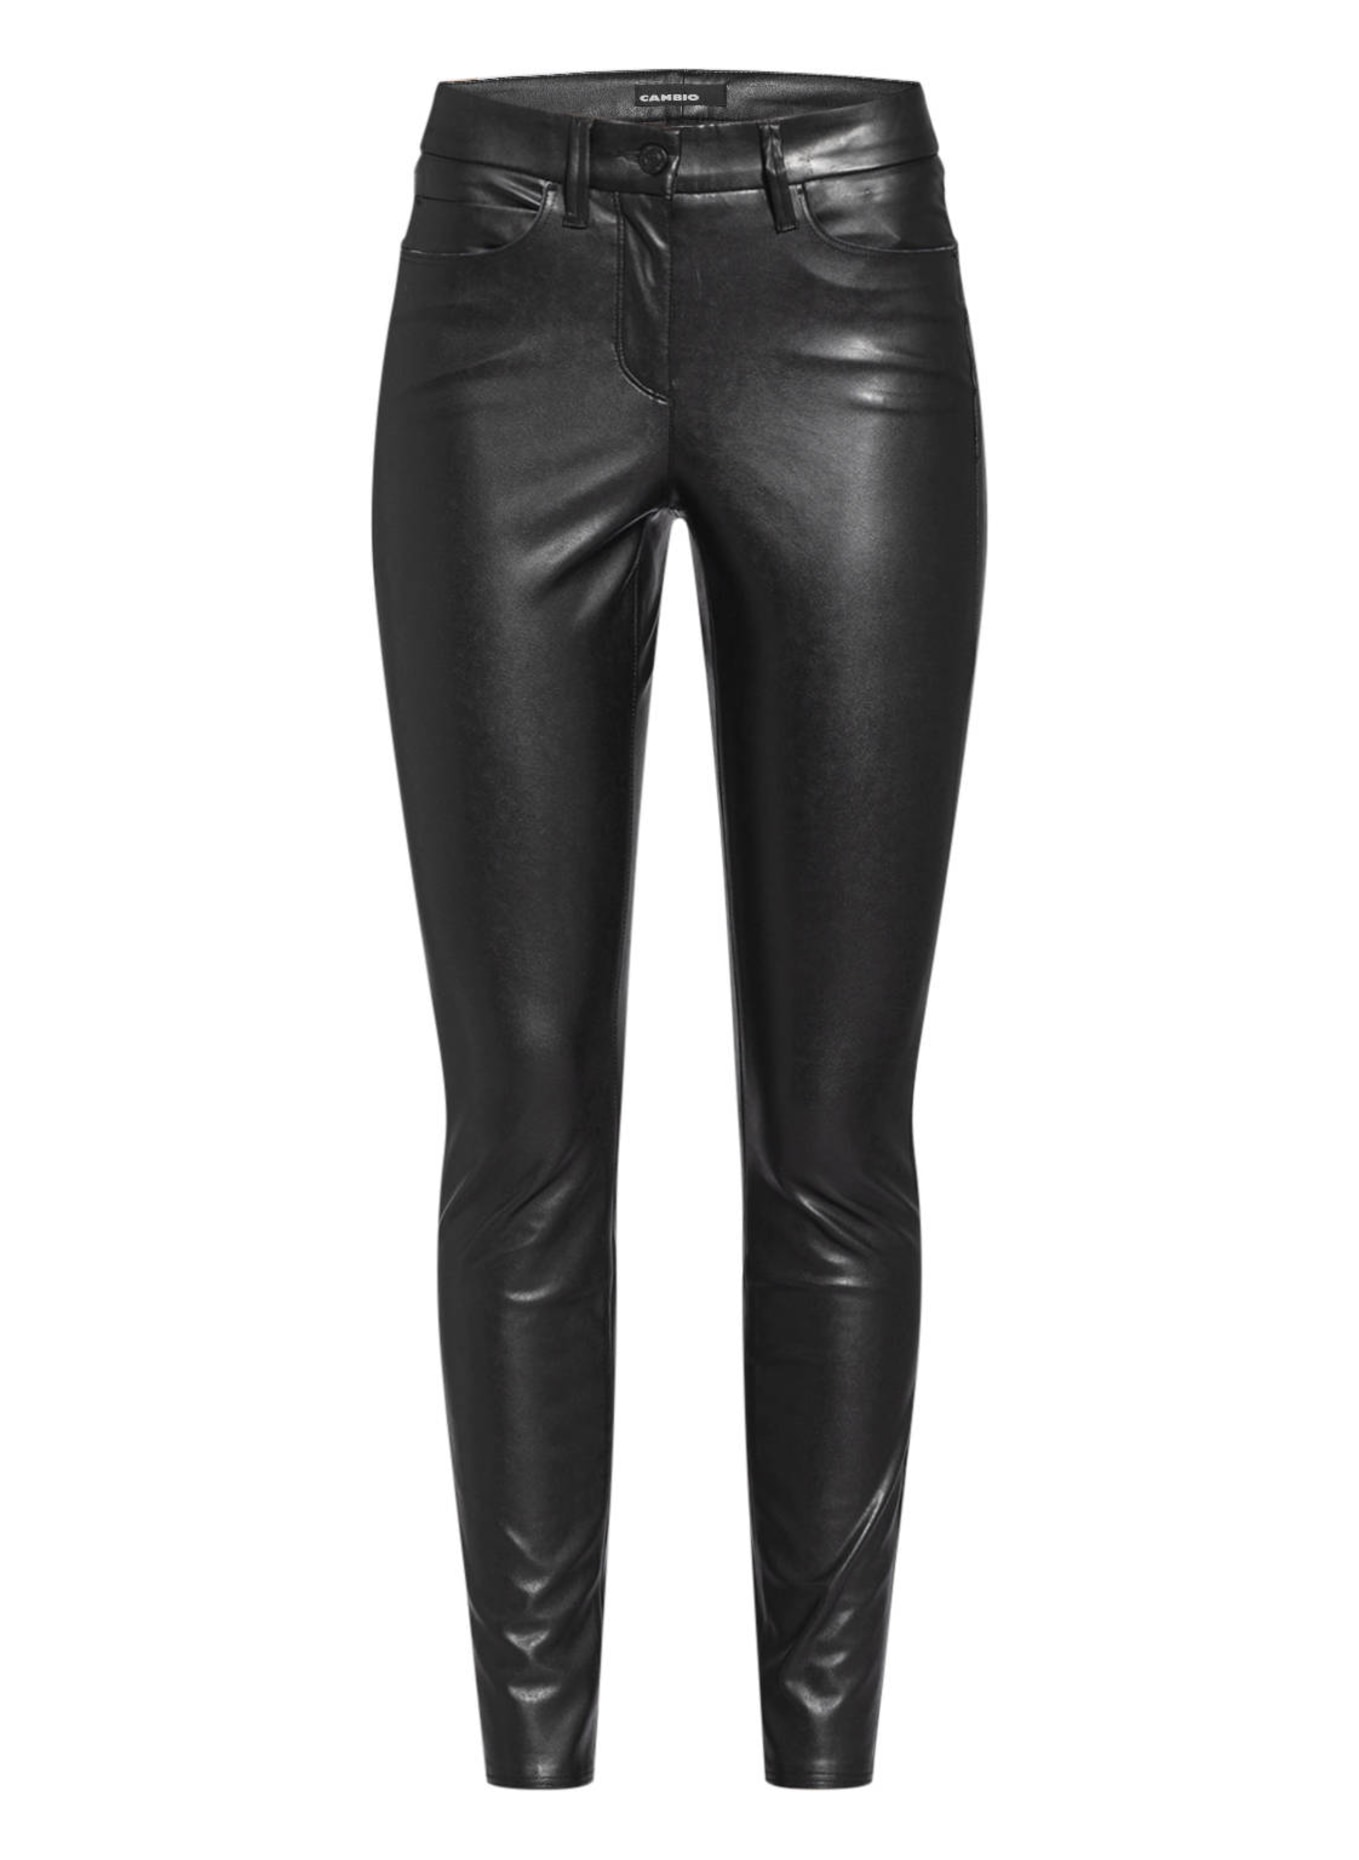 Rock Chick Leather Look Trousers  Womens Trousers  Joe Browns